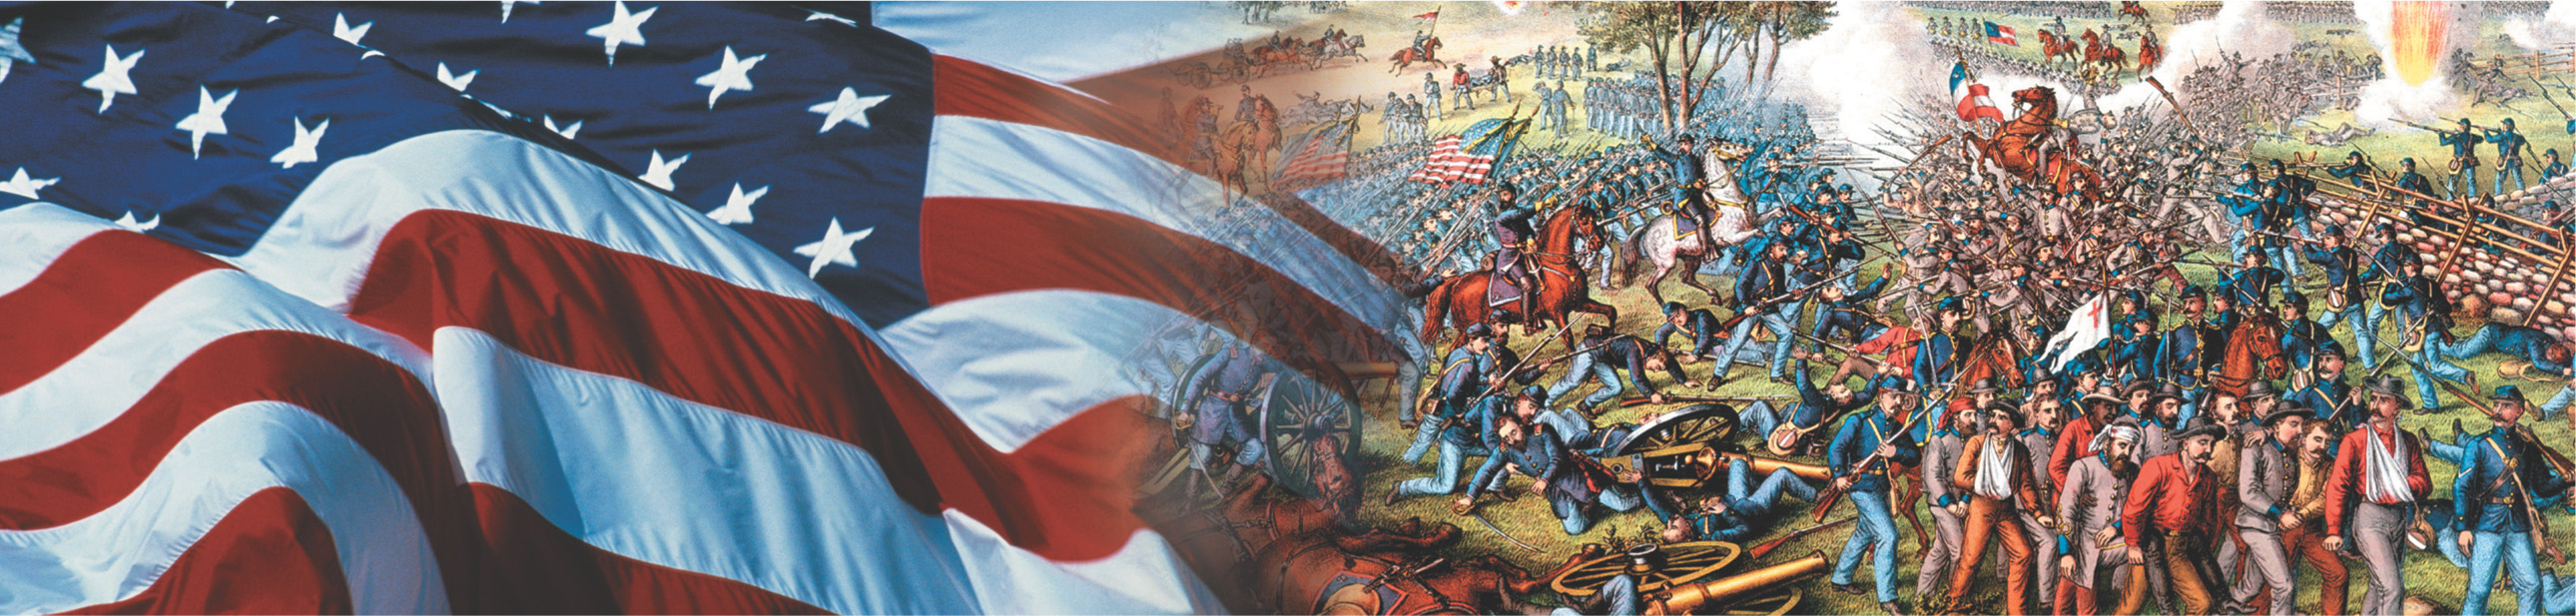 Banner: an American flag and a painting of Union and Confederate armies fighting on a battlefield.